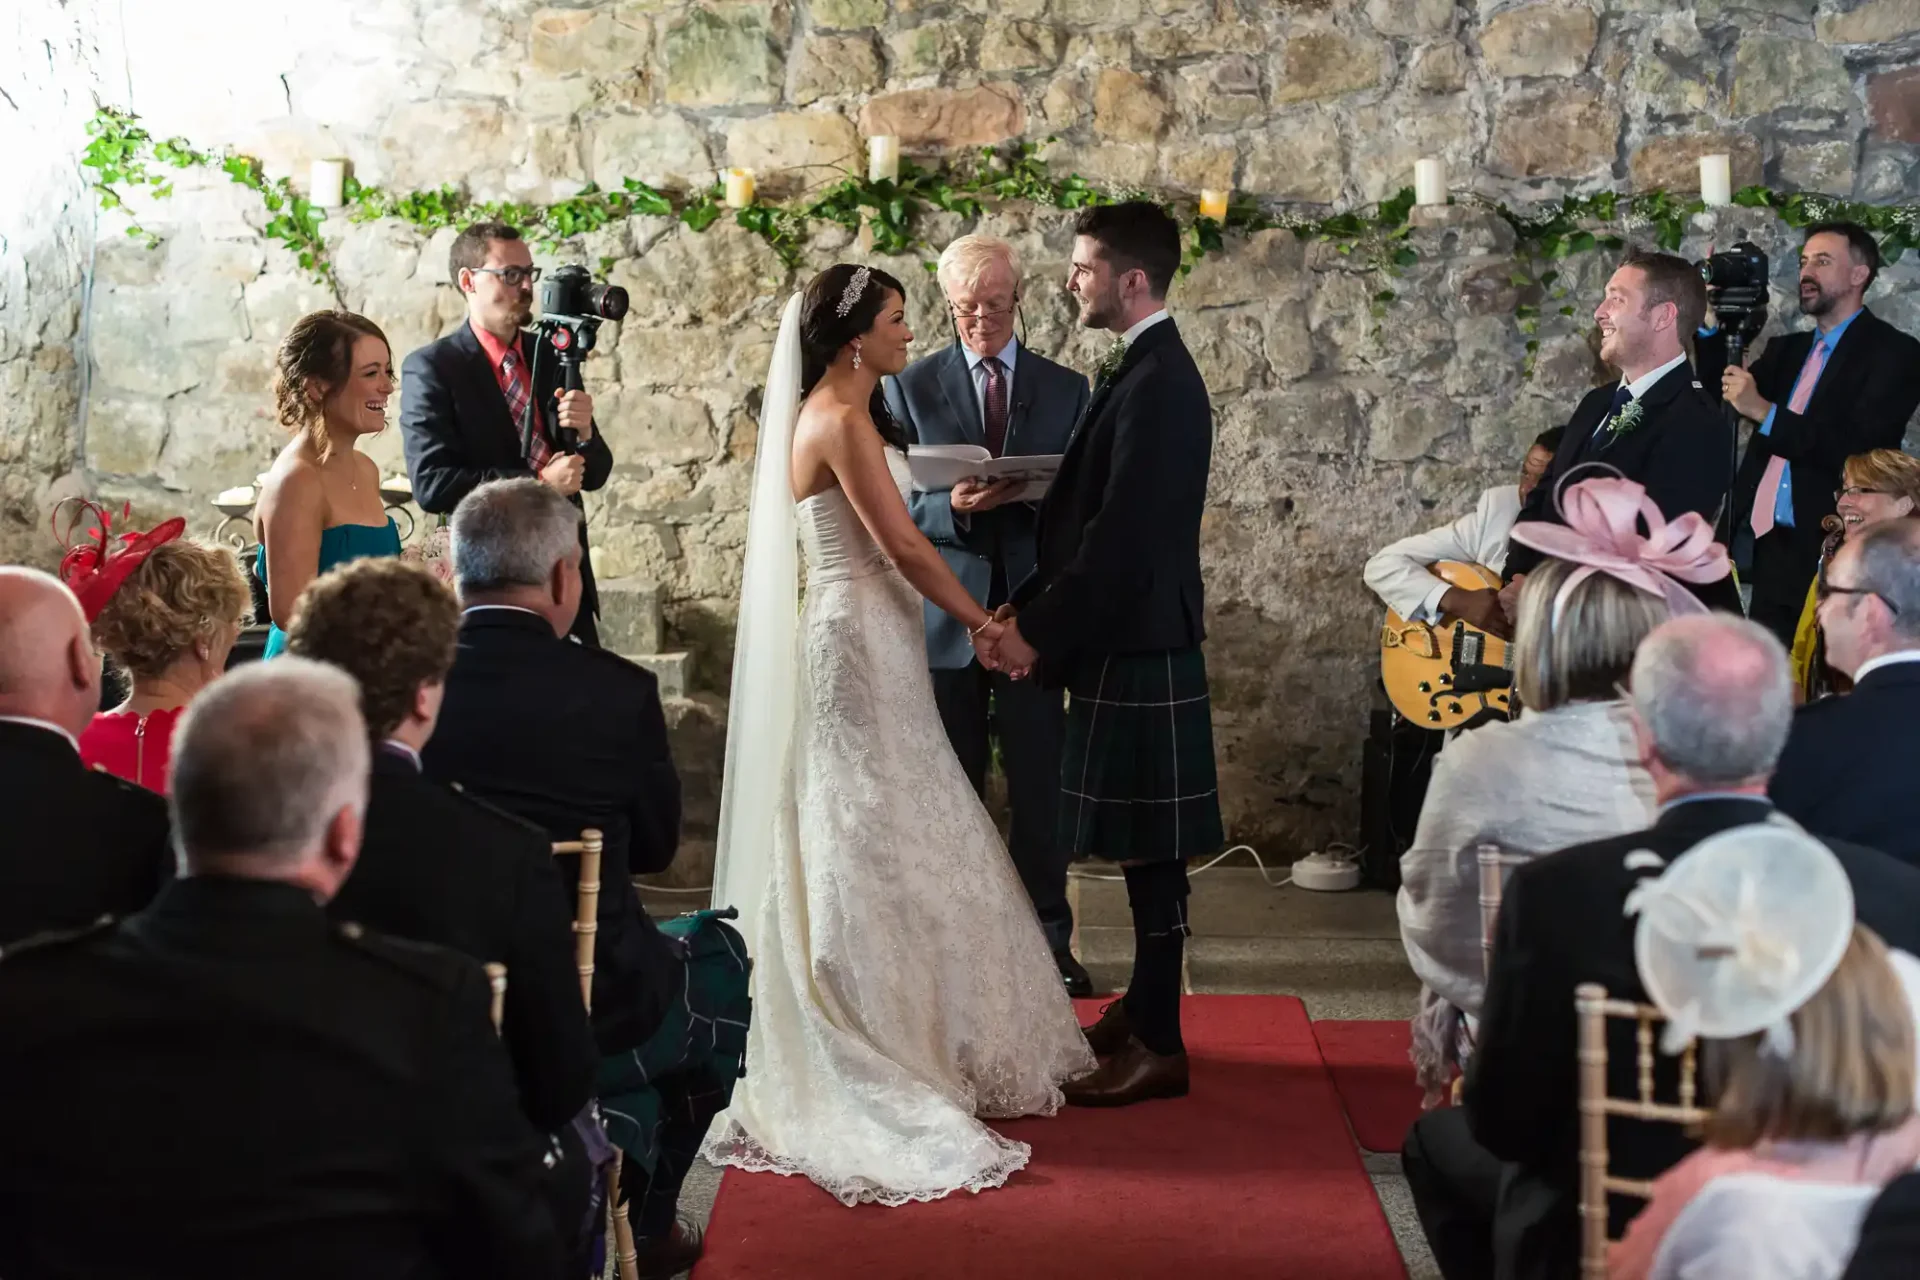 A wedding ceremony inside a rustic stone venue, featuring a bride and groom exchanging vows, with guests and a photographer capturing the moment.